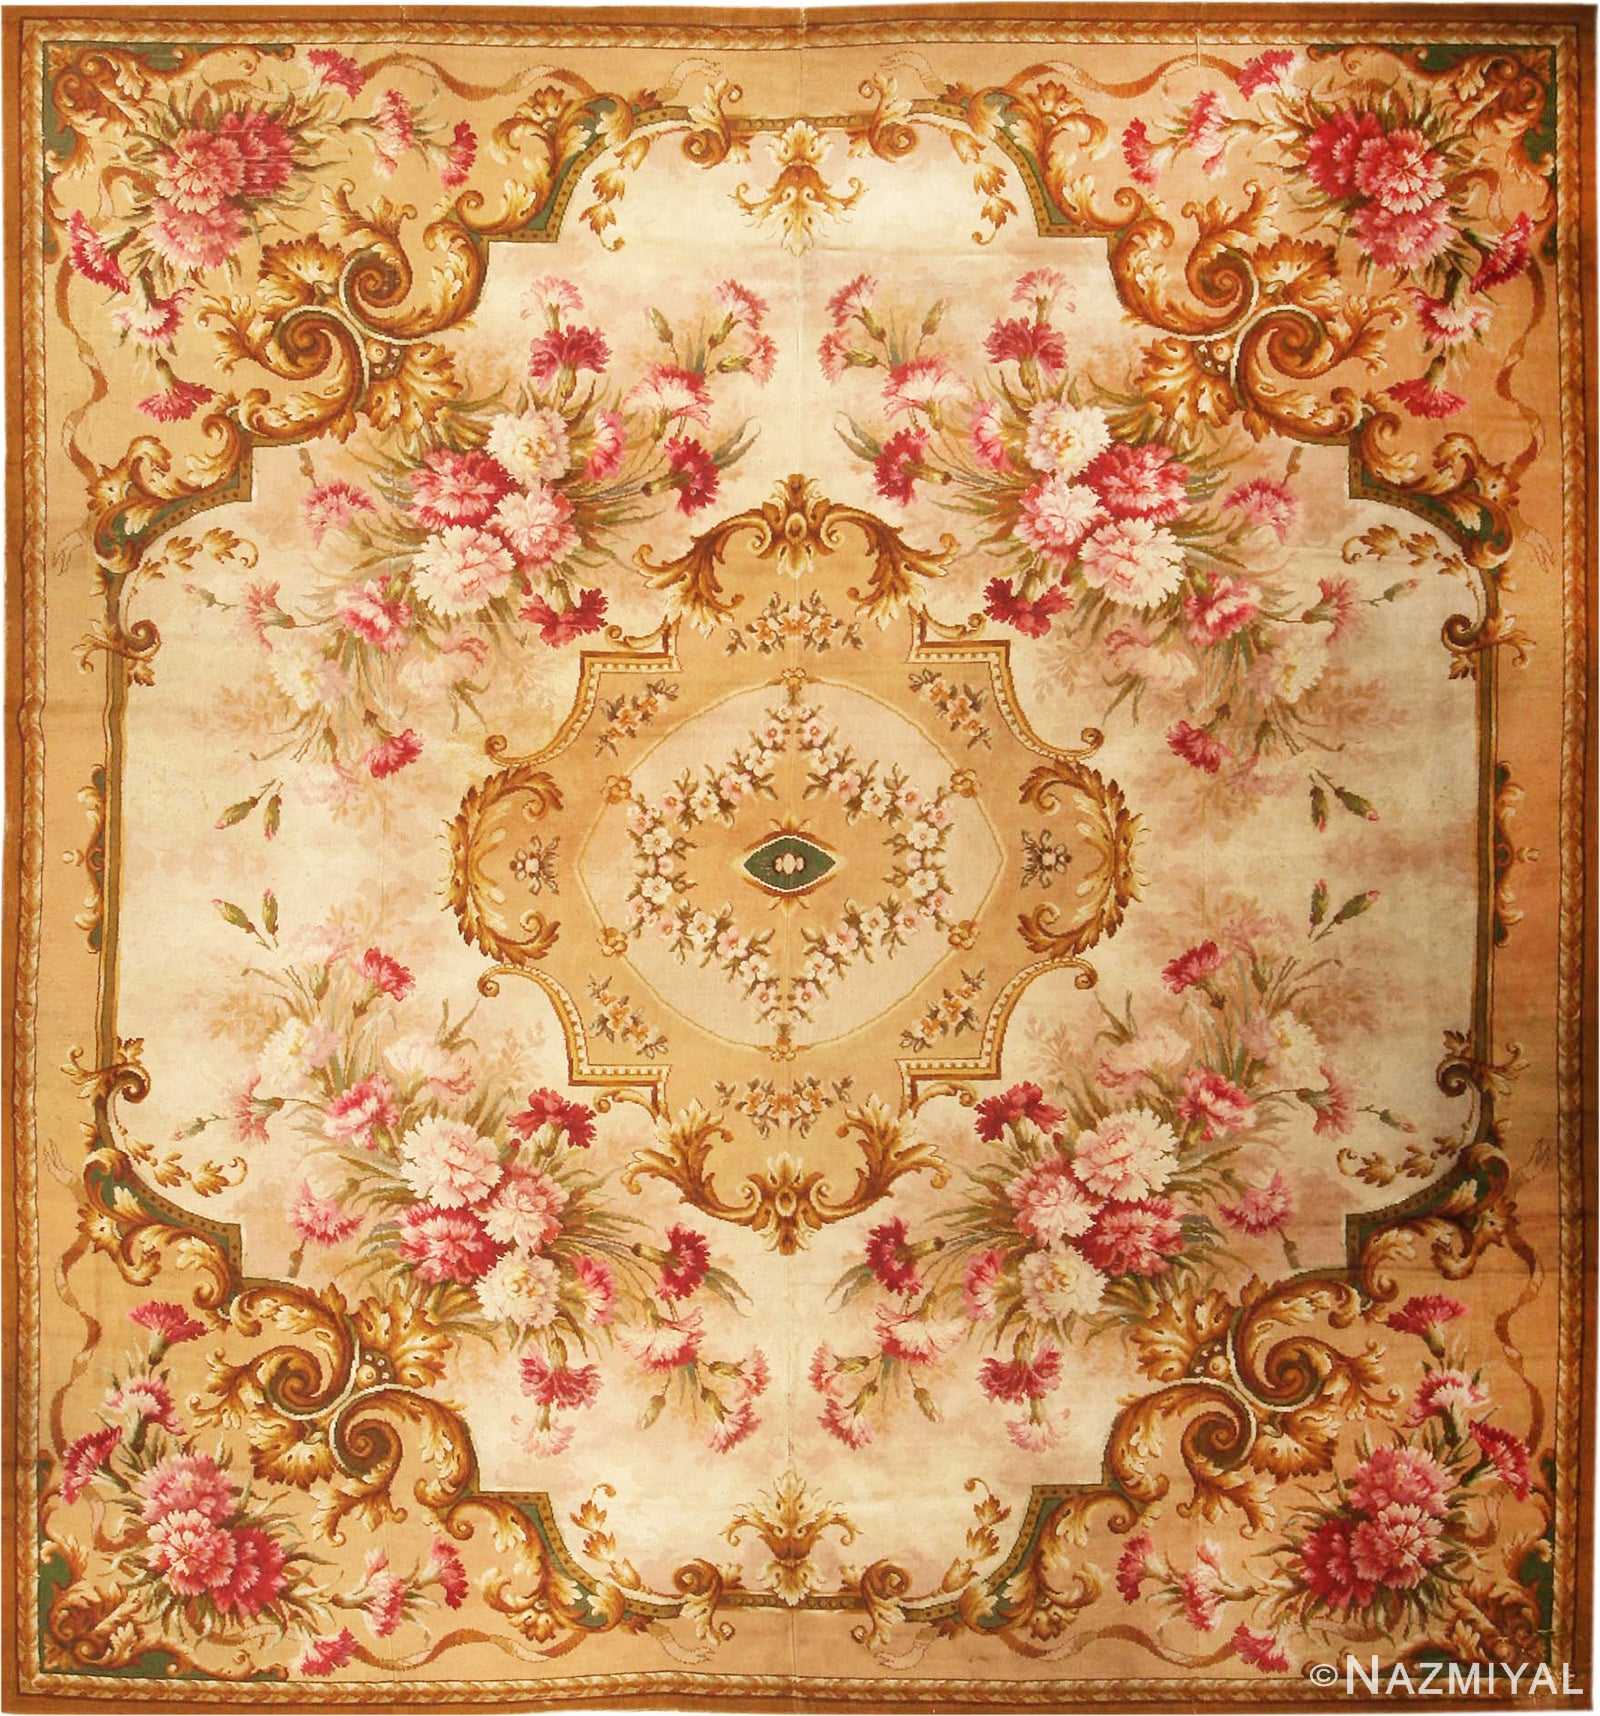 Antique English Axminster Rug #2409 by Nazmiyal Antique Rugs